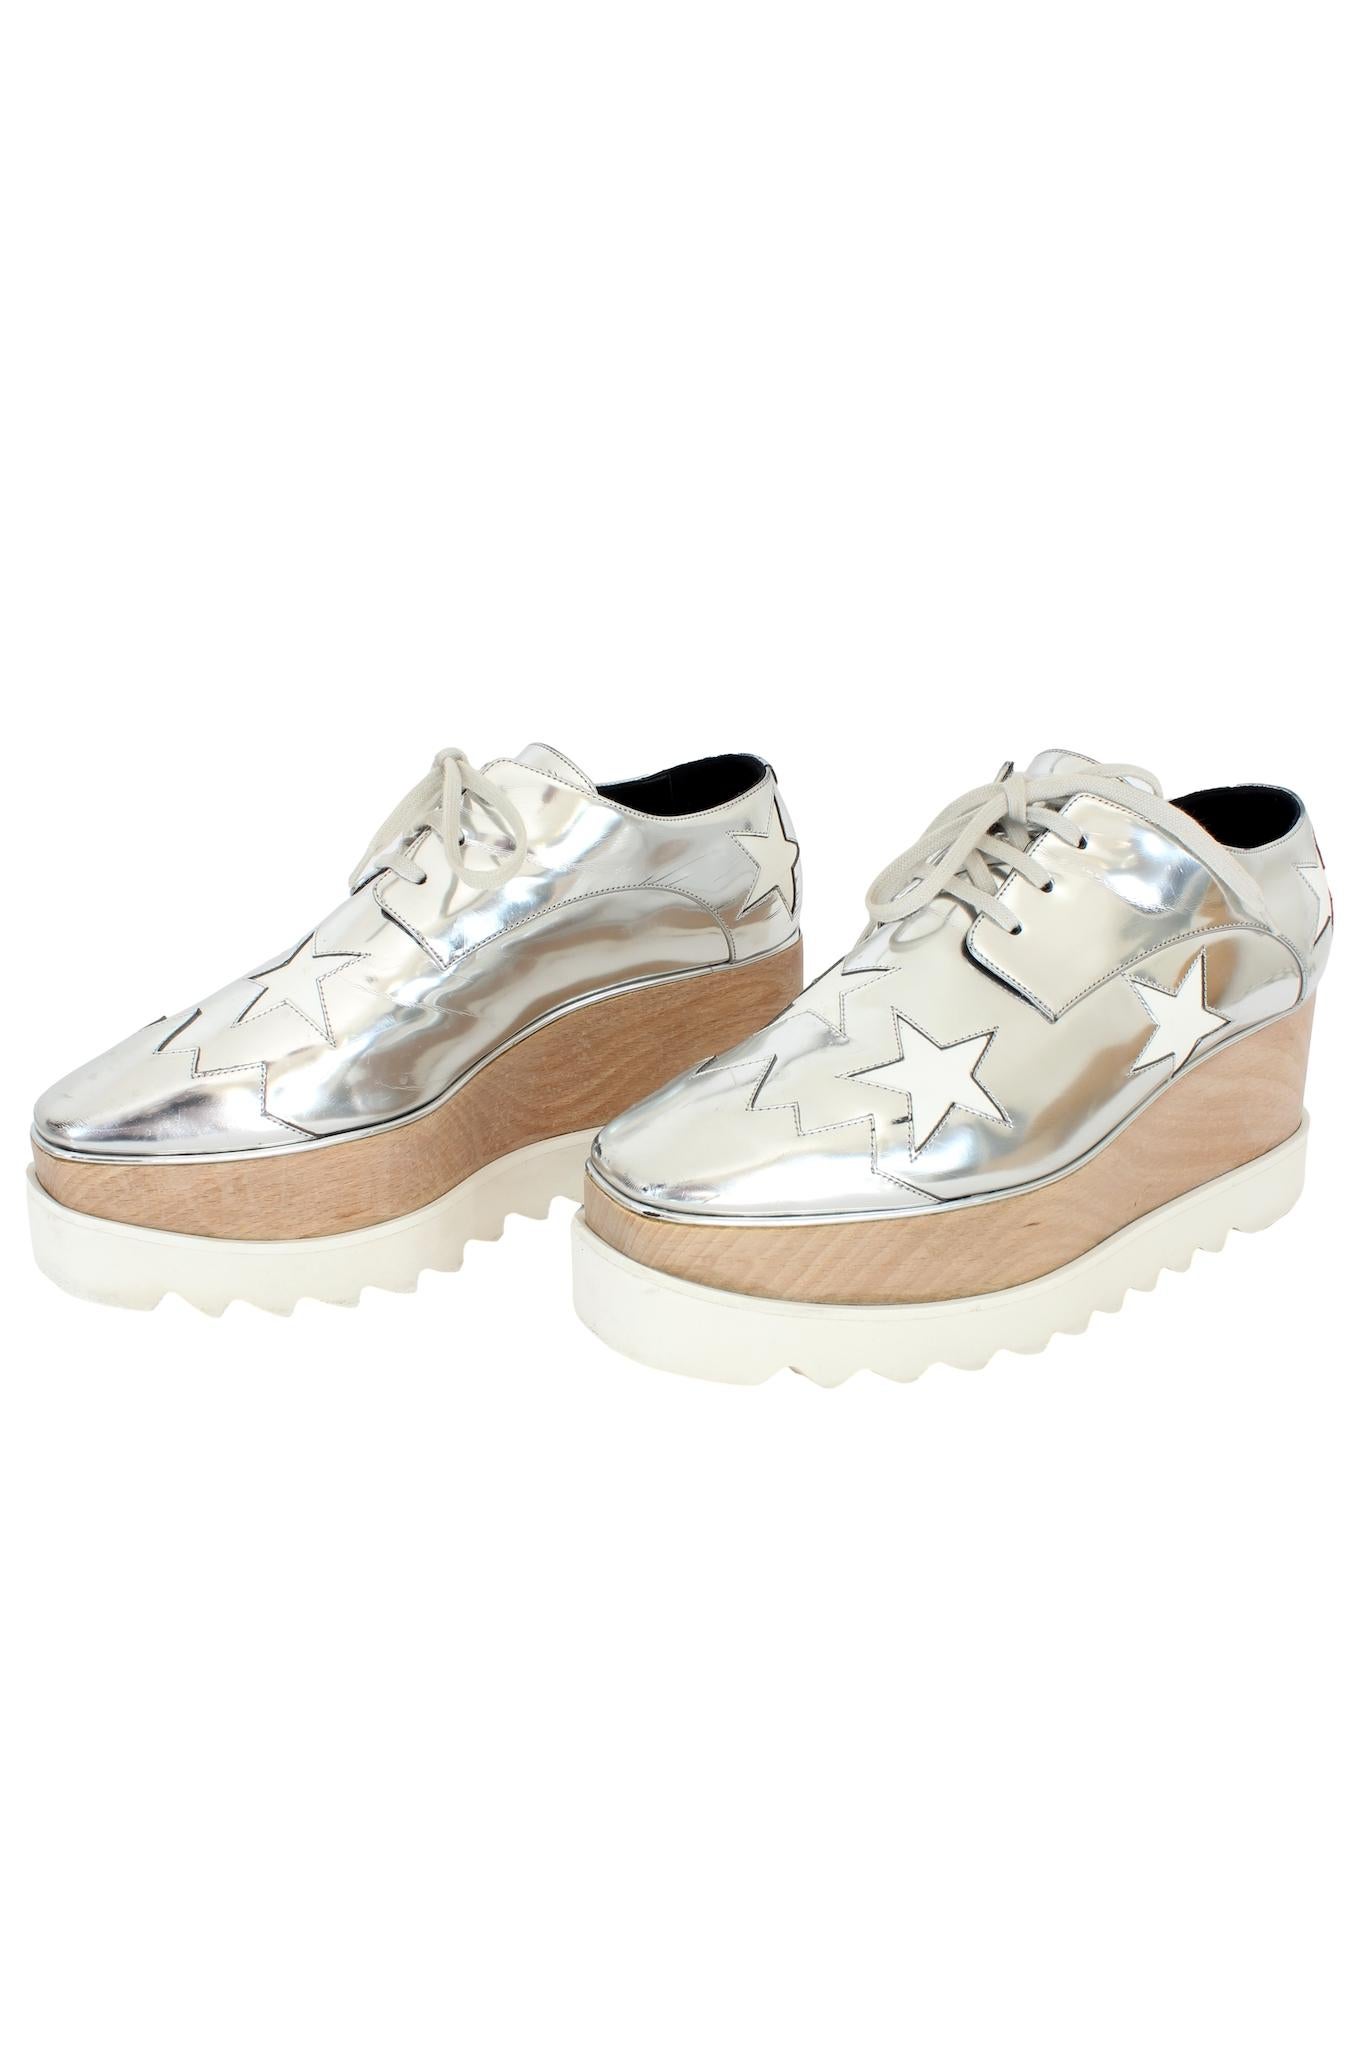 Stella McCartney Silver Leather Star Elyse Shoes 2020s In Good Condition For Sale In Brindisi, Bt